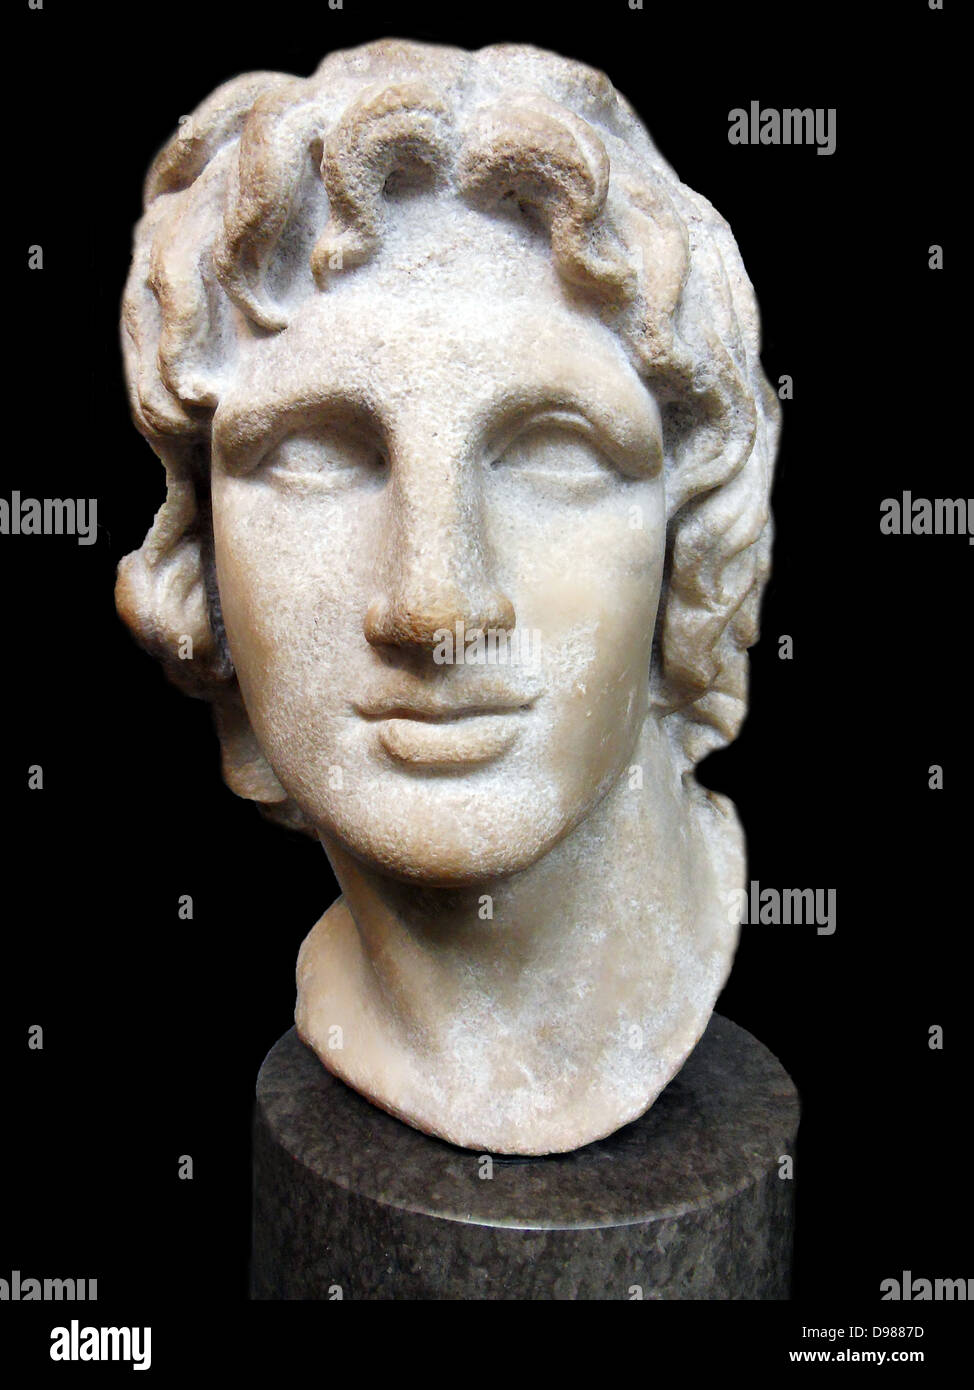 Marble portrait of Alexander the GreatHellenistic Greek, 2nd-1st century BC. Alexander (reigned 336-323 BC) chose only a few artists to produce his image, and famous names such as the sculptor Lysippos and the painter Apelles were associated with his portraiture. Stock Photo